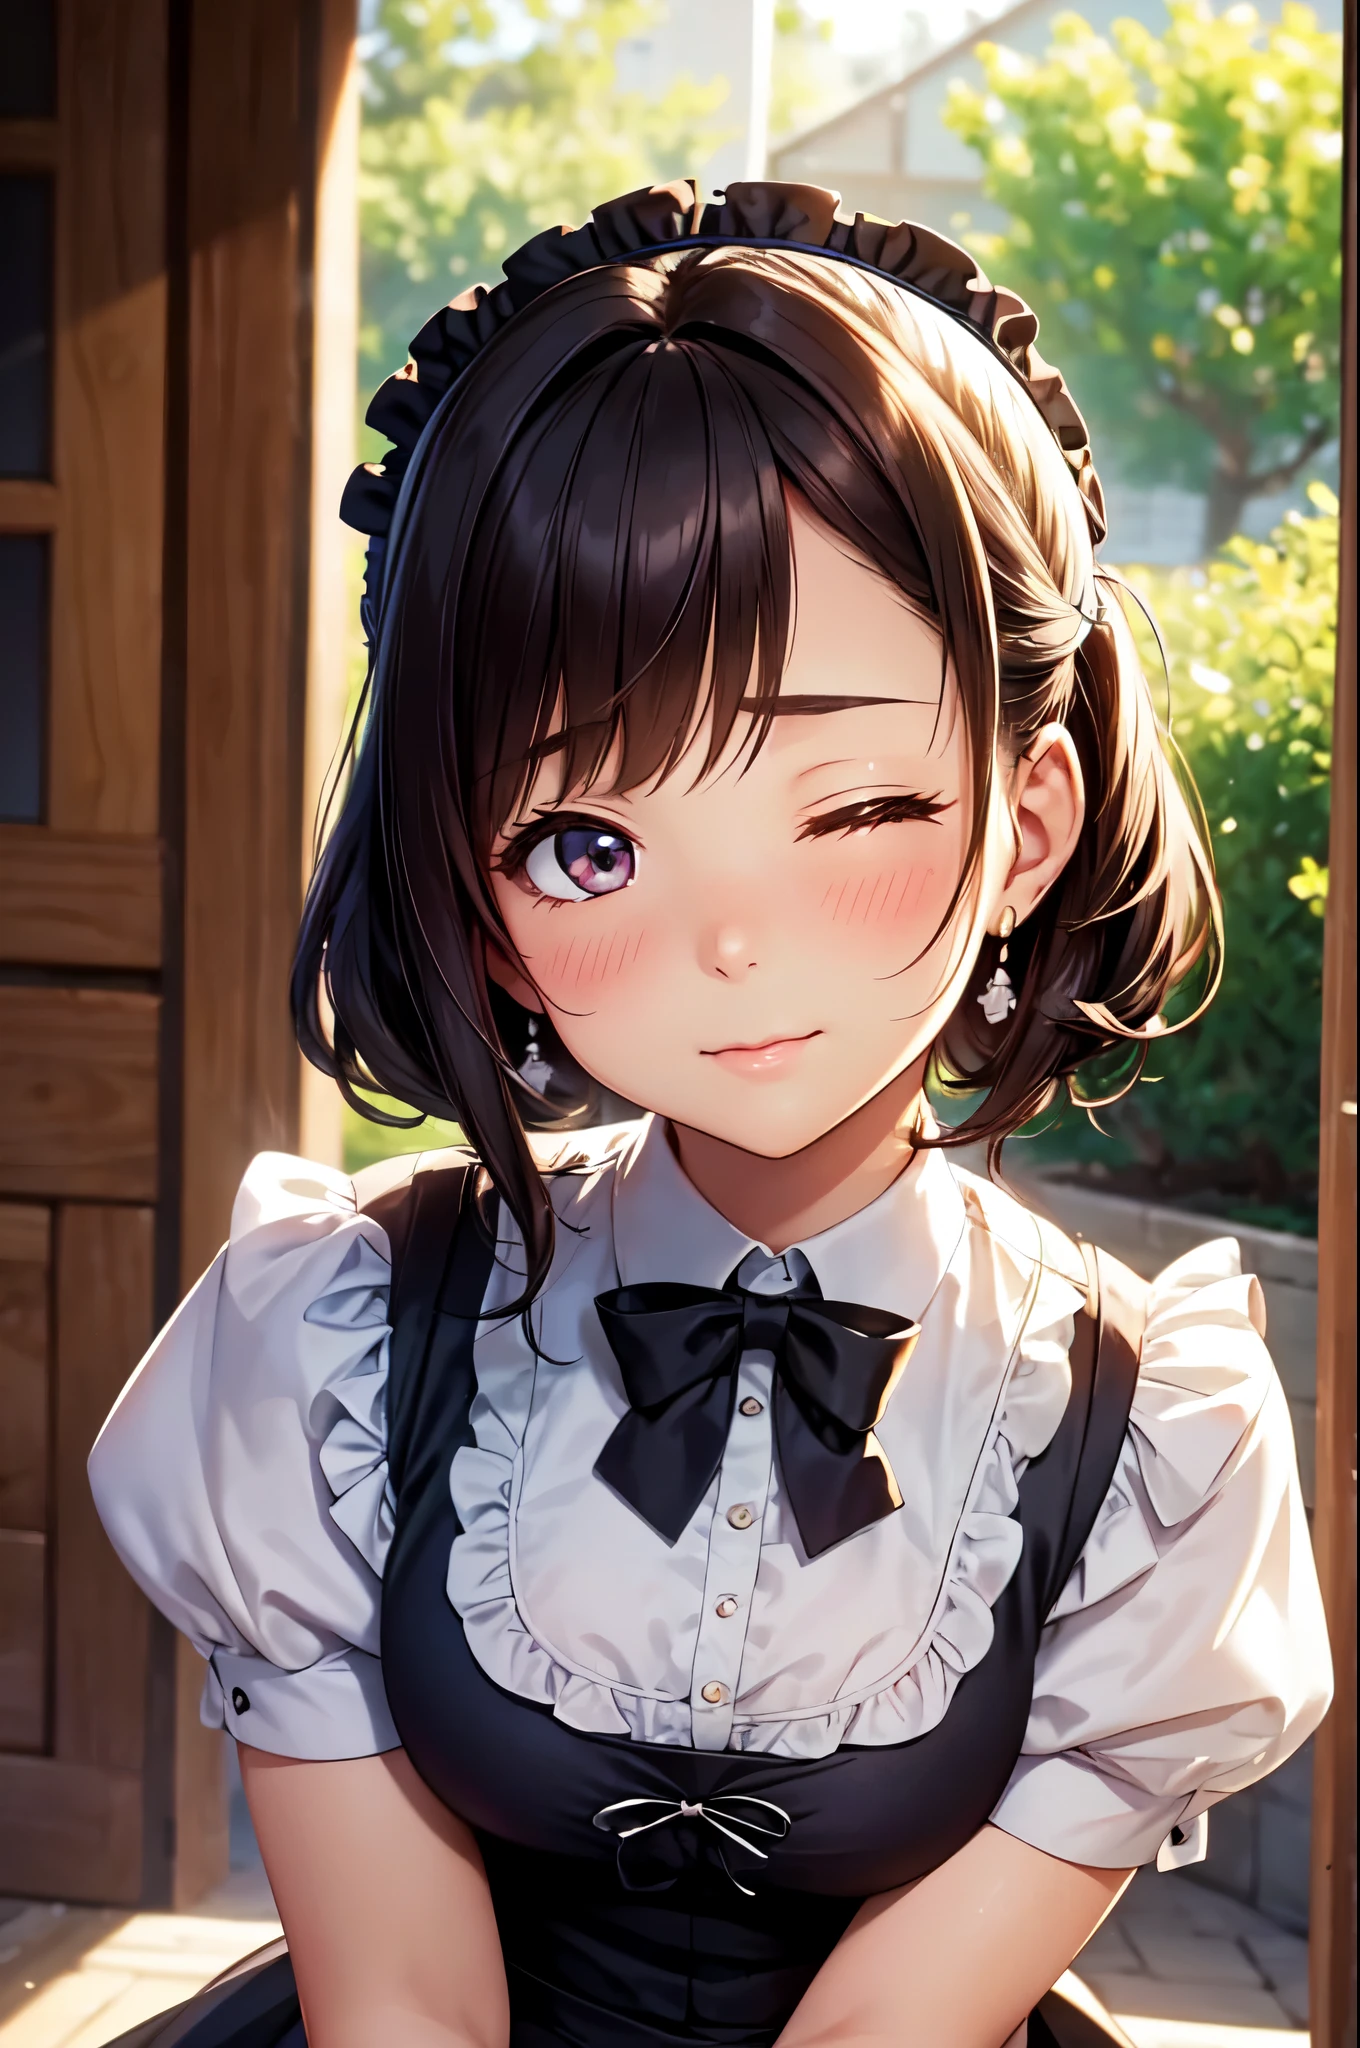 (High quality, High resolution, Fine details), Anime Style, (Kissing face:1.3), (Victorian Maid Dress), solo, curvy women, (Close eyes:1.2), blush, soft lips, Sweat, Oily skin, (Front view:1.4), (Focus on Face:1.6), (Tilt Head:1.3), shallow depth of field, natural sunlight, soft and warm lighting, subtle shadows, romantic atmosphere
